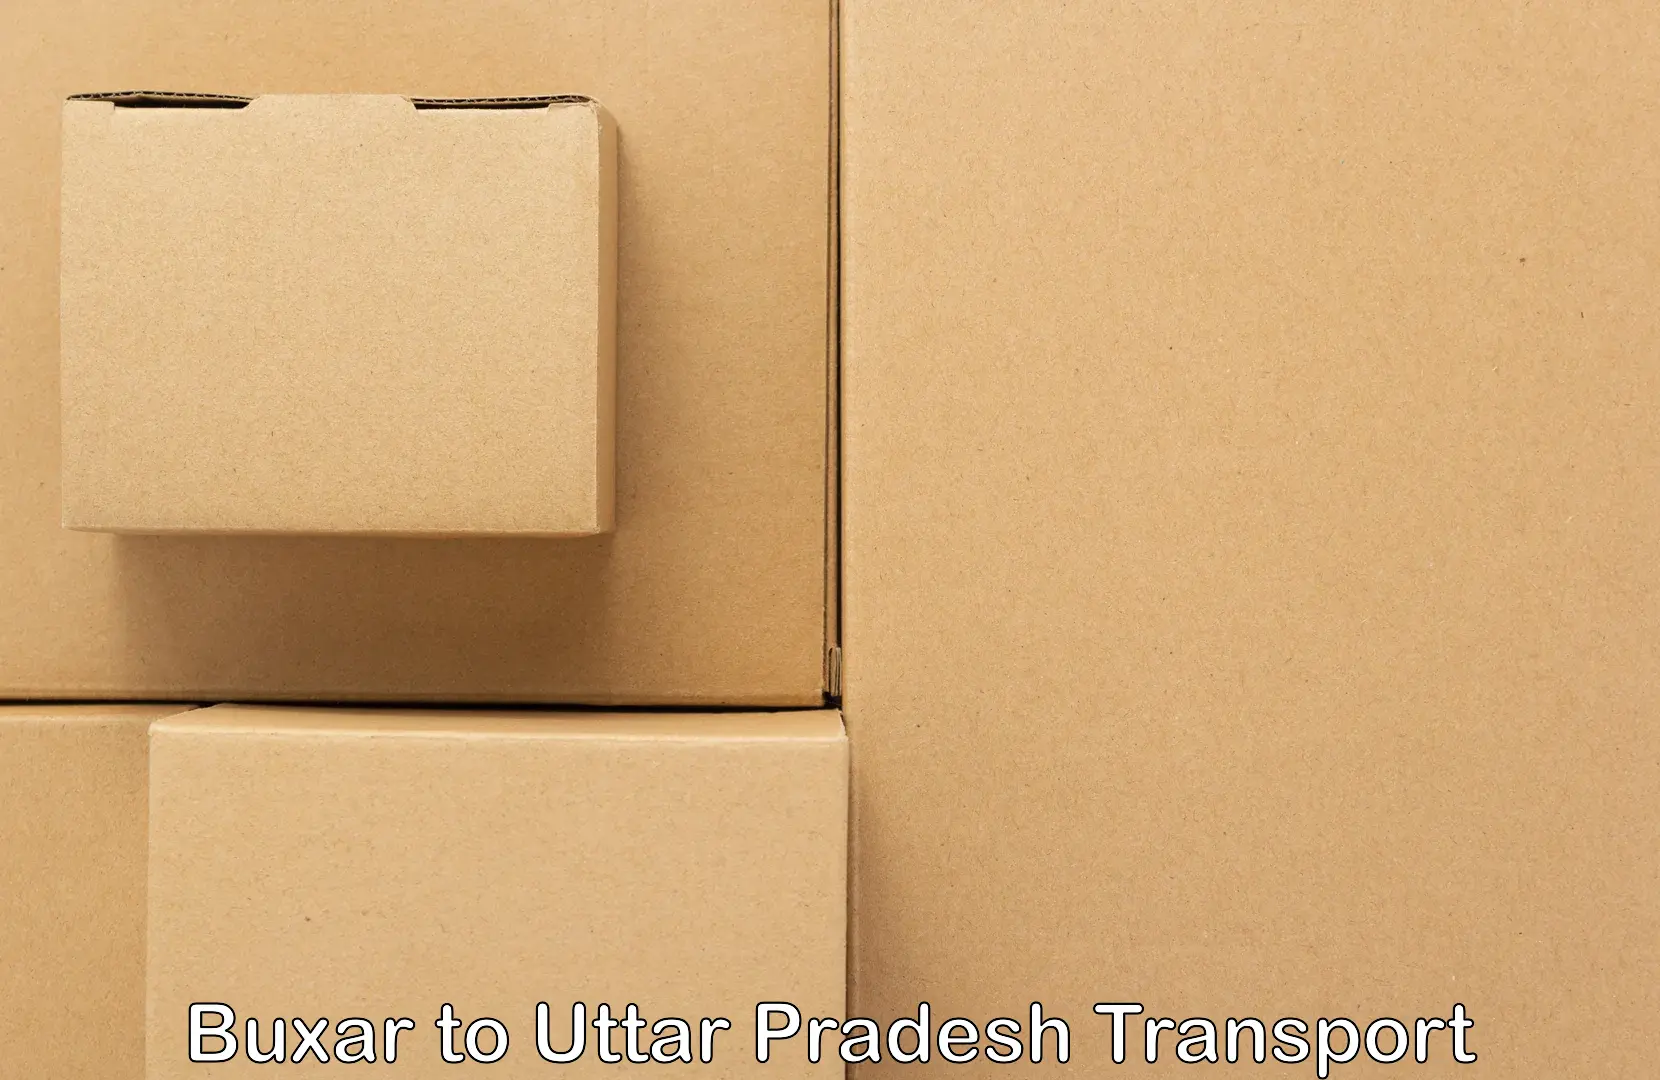 Truck transport companies in India Buxar to Chunar